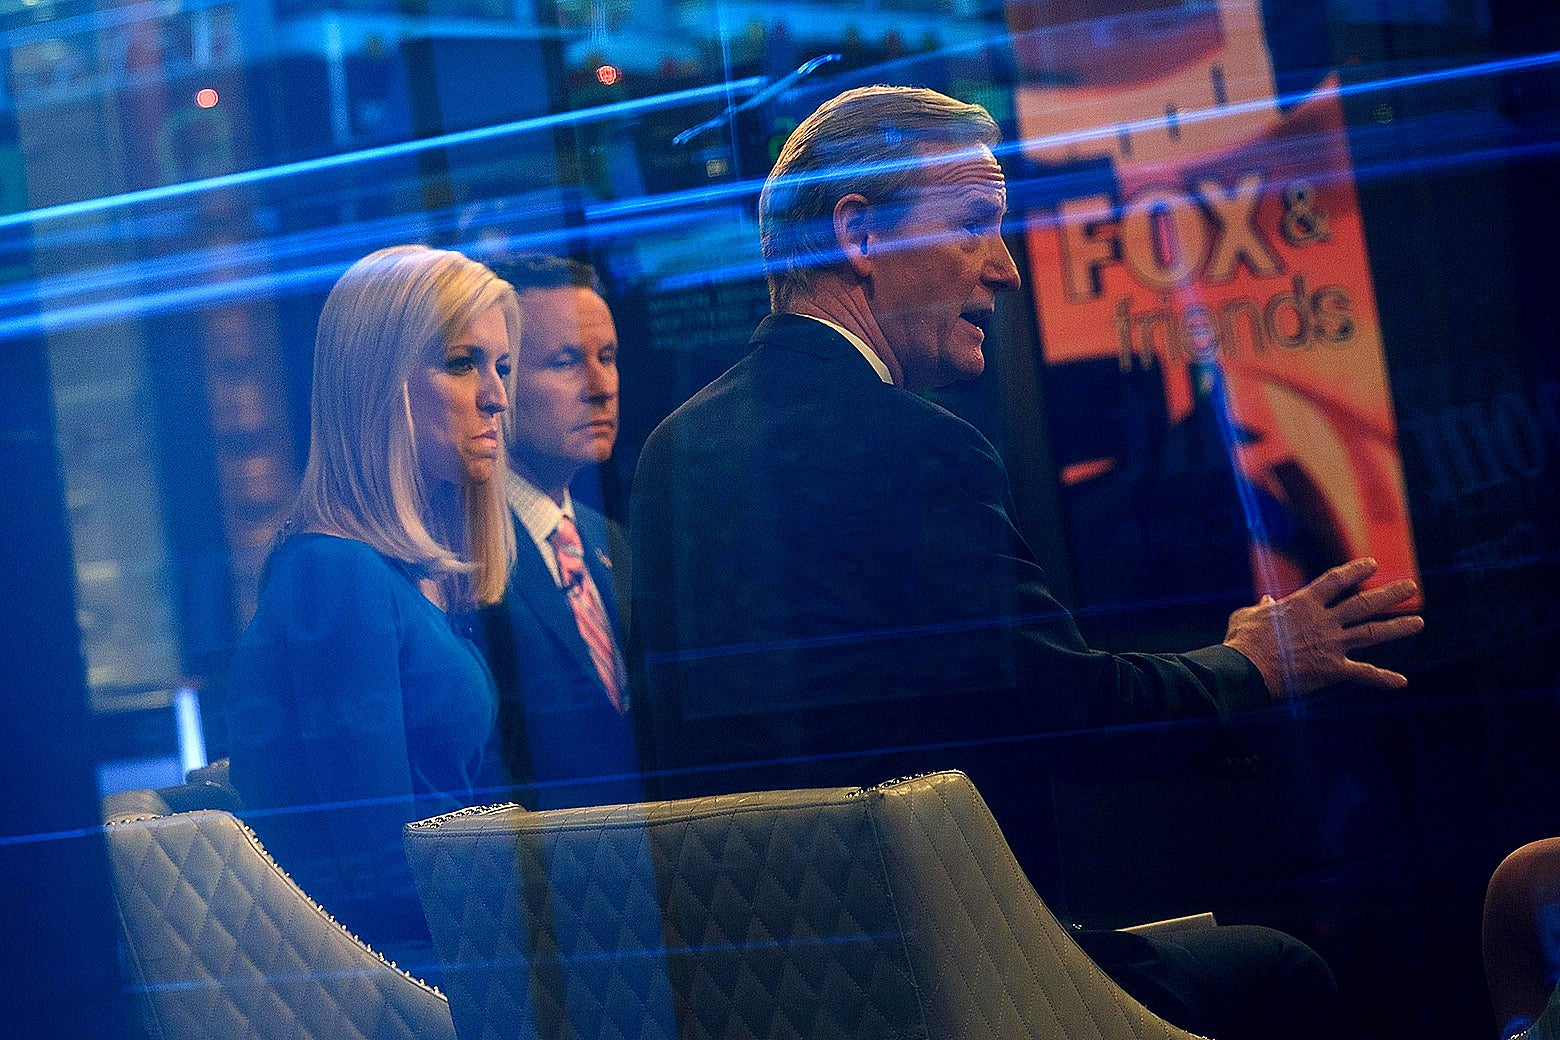 Seen through a window, (L to R) hosts Ainsley Earhardt, Brian Kilmeade and Steve Doocy broadcast Fox and Friends from the Fox News studios in New York City.